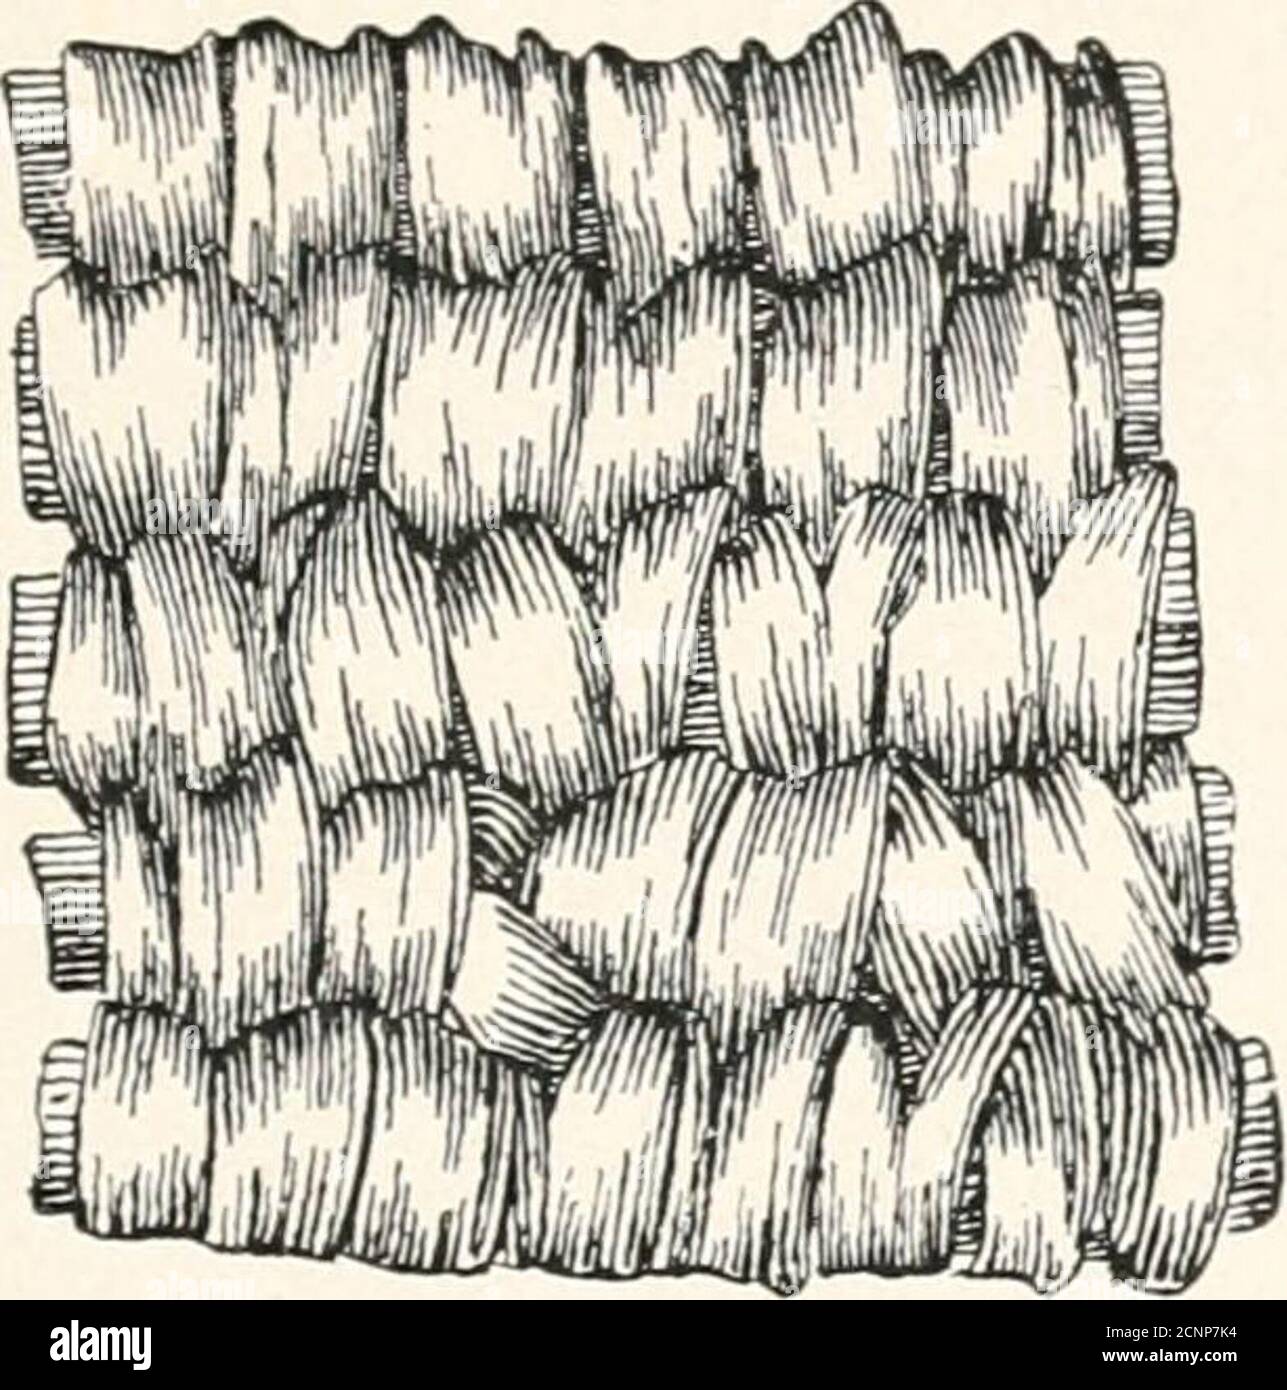 . How to make Indian and other baskets . is possible to make the following nine varietiesof coiled basketry, matting, or bagging: A. Coiled work without foundation. B. Simple interlocking coils. C. Single-rod foundation. D. Double-stem coil, two rod foundation. E. Packing inclosed, rod and welt foundation. F. Packing inclosed, two rod and splint foundation. G. One rod inclosed, three-rod foundation.H. Splint foundation. I. Grass-coil foundation. K. Fuegian coiled basketry. These will now be taken up systematically and illustrated (fig. 76). HOW TO MAKE INDIAN AND OTHER BASKETS. A. COILED WORK Stock Photo